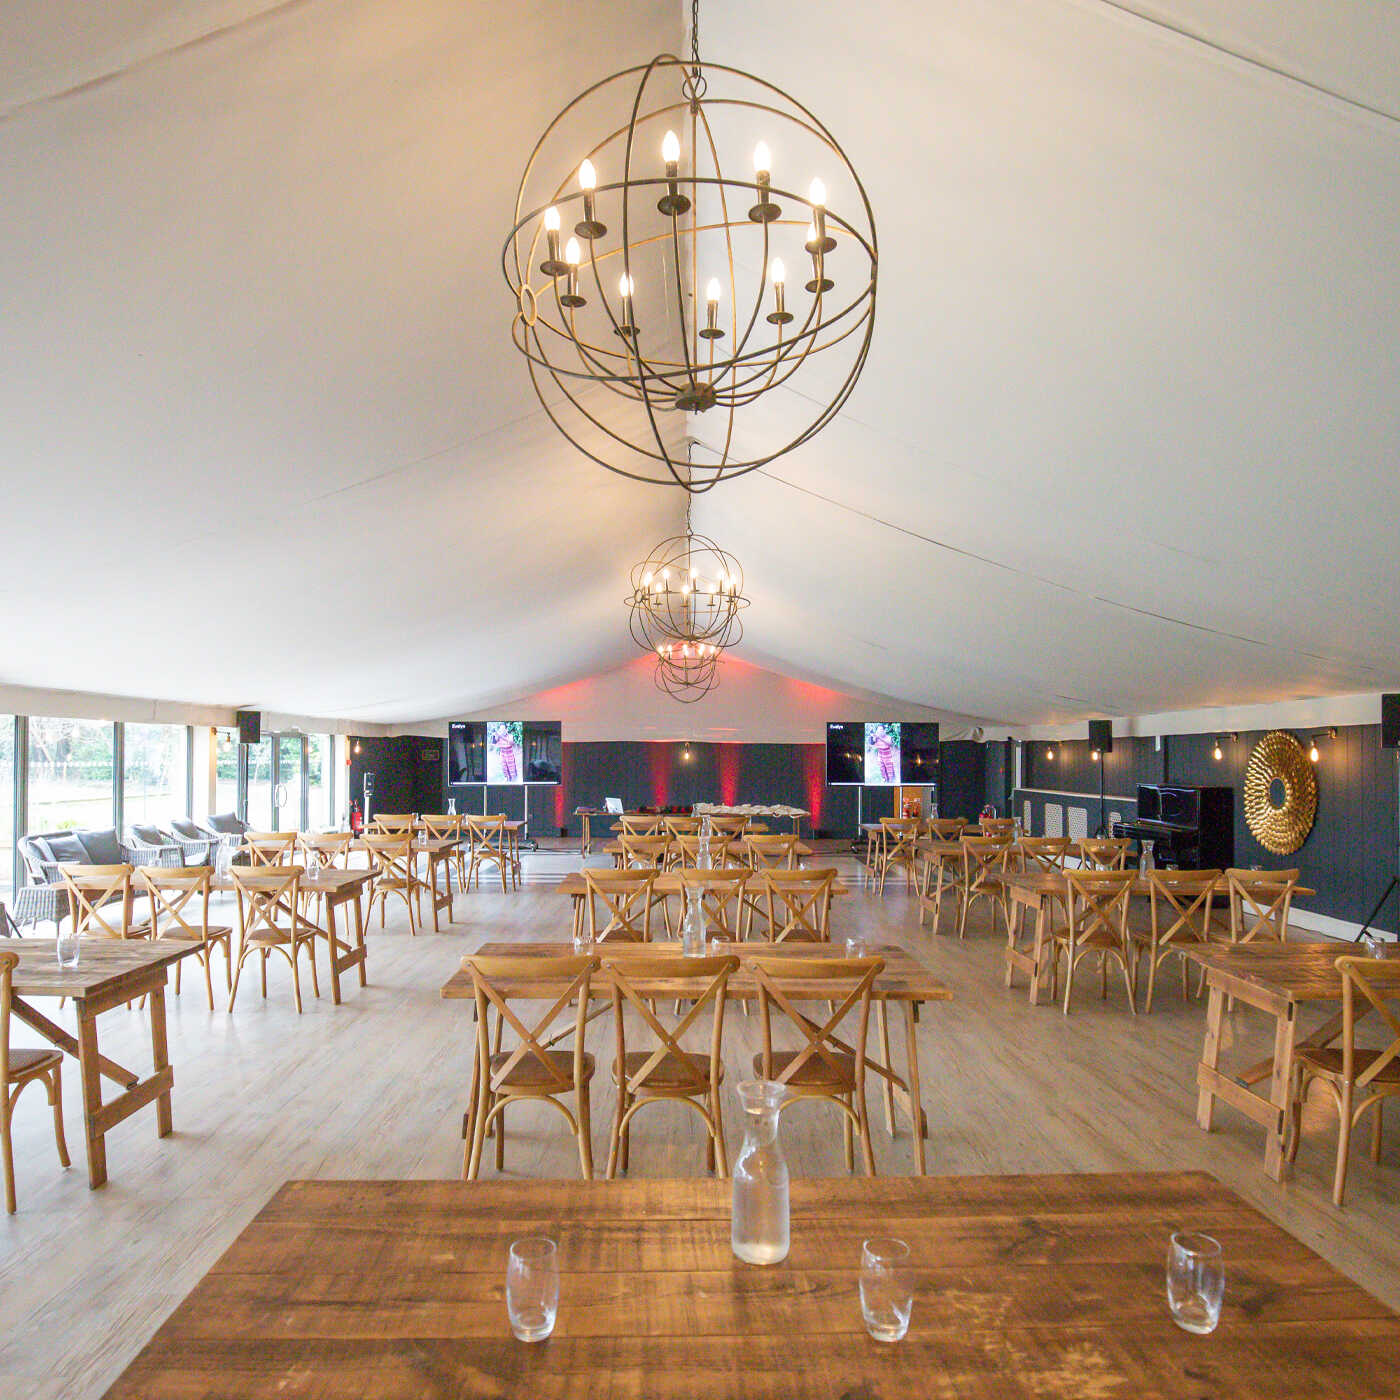 Conferences & AGM Business Presentations Venue Pylewell Park New Forest Hampshire